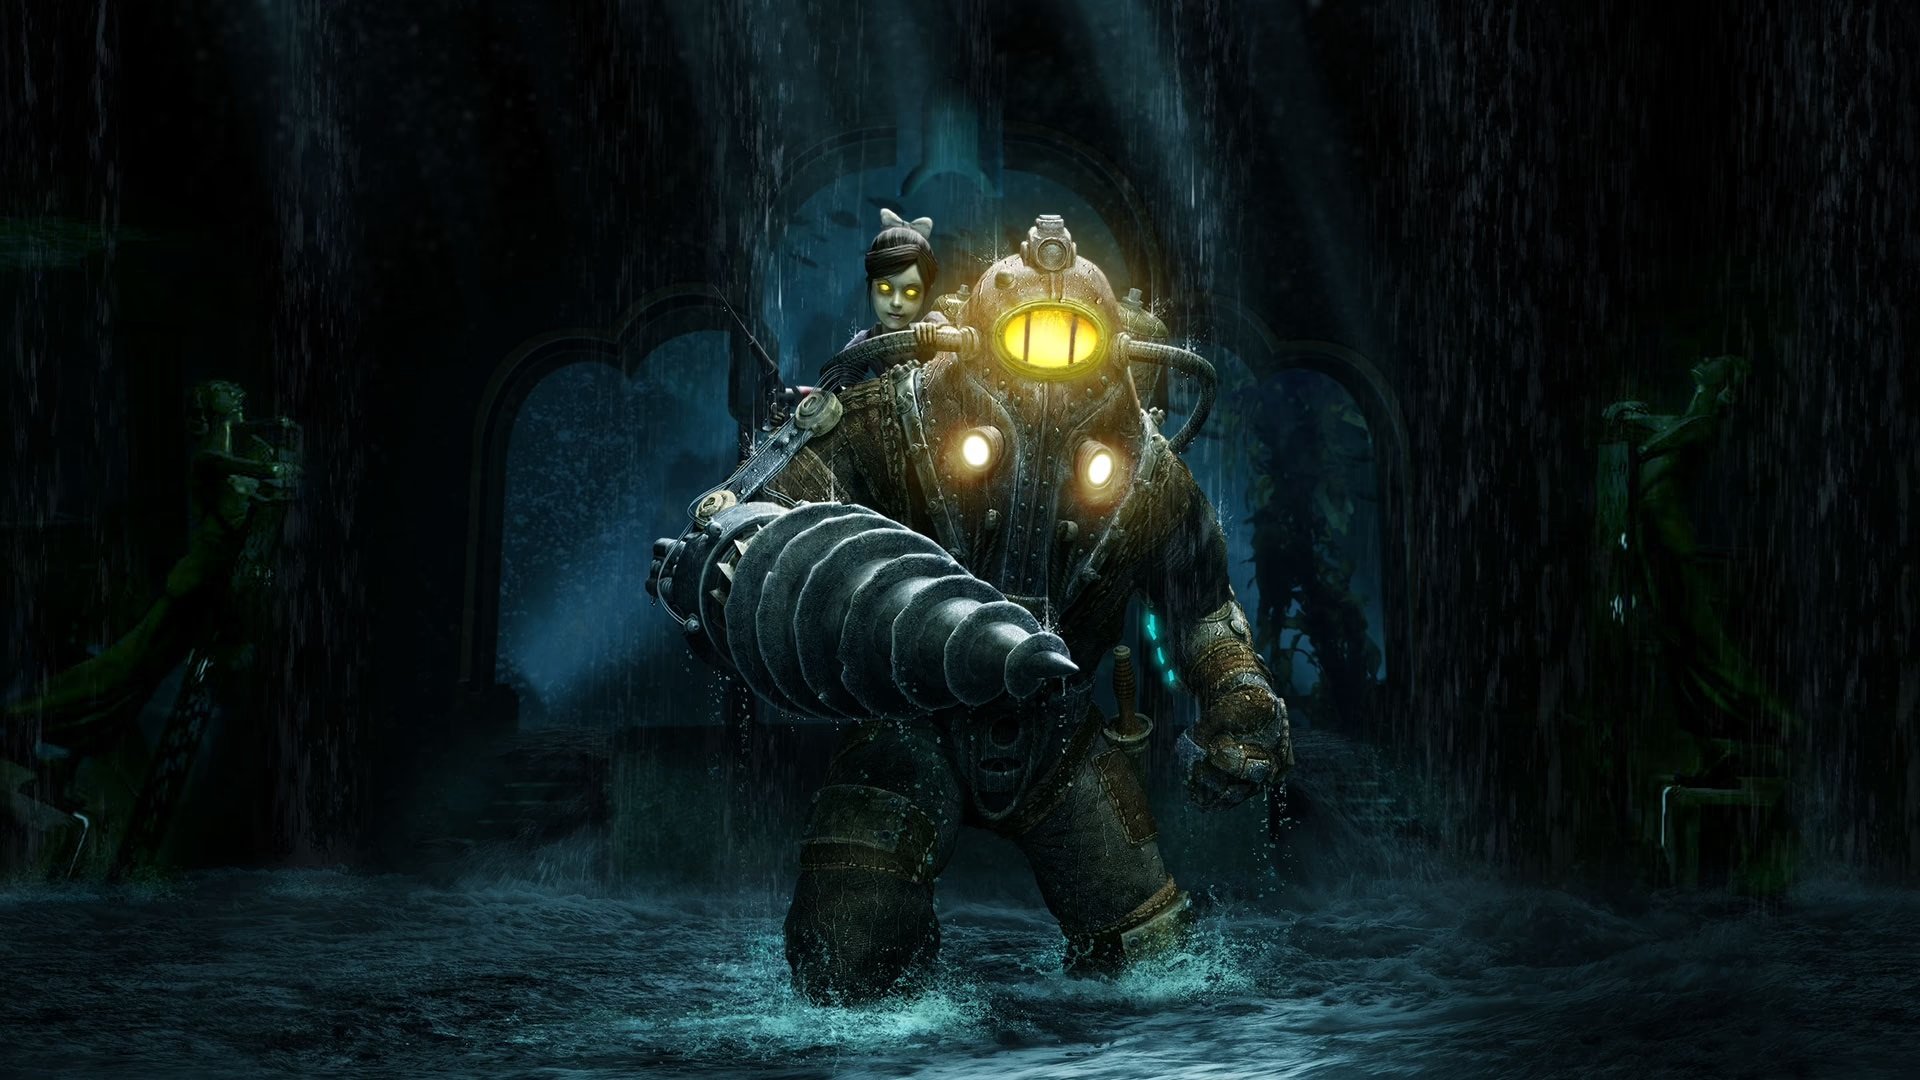 2K’s BioShock team is recruiting like crazy for the next installment in the series